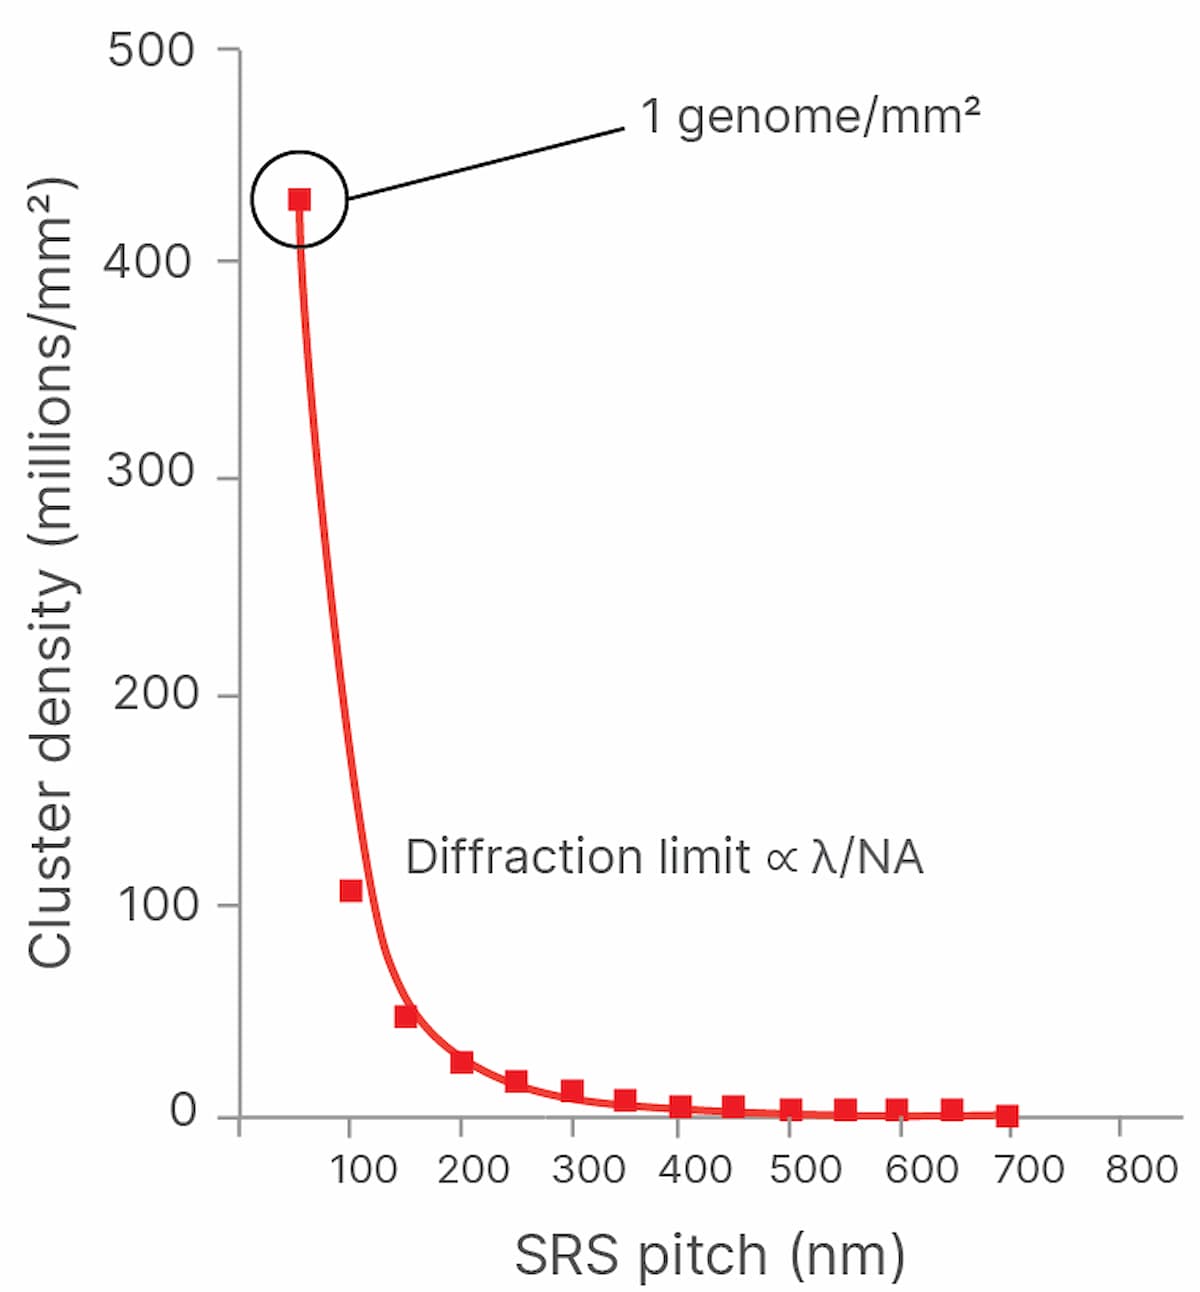 Figure 1: Diffraction limit and cluster density